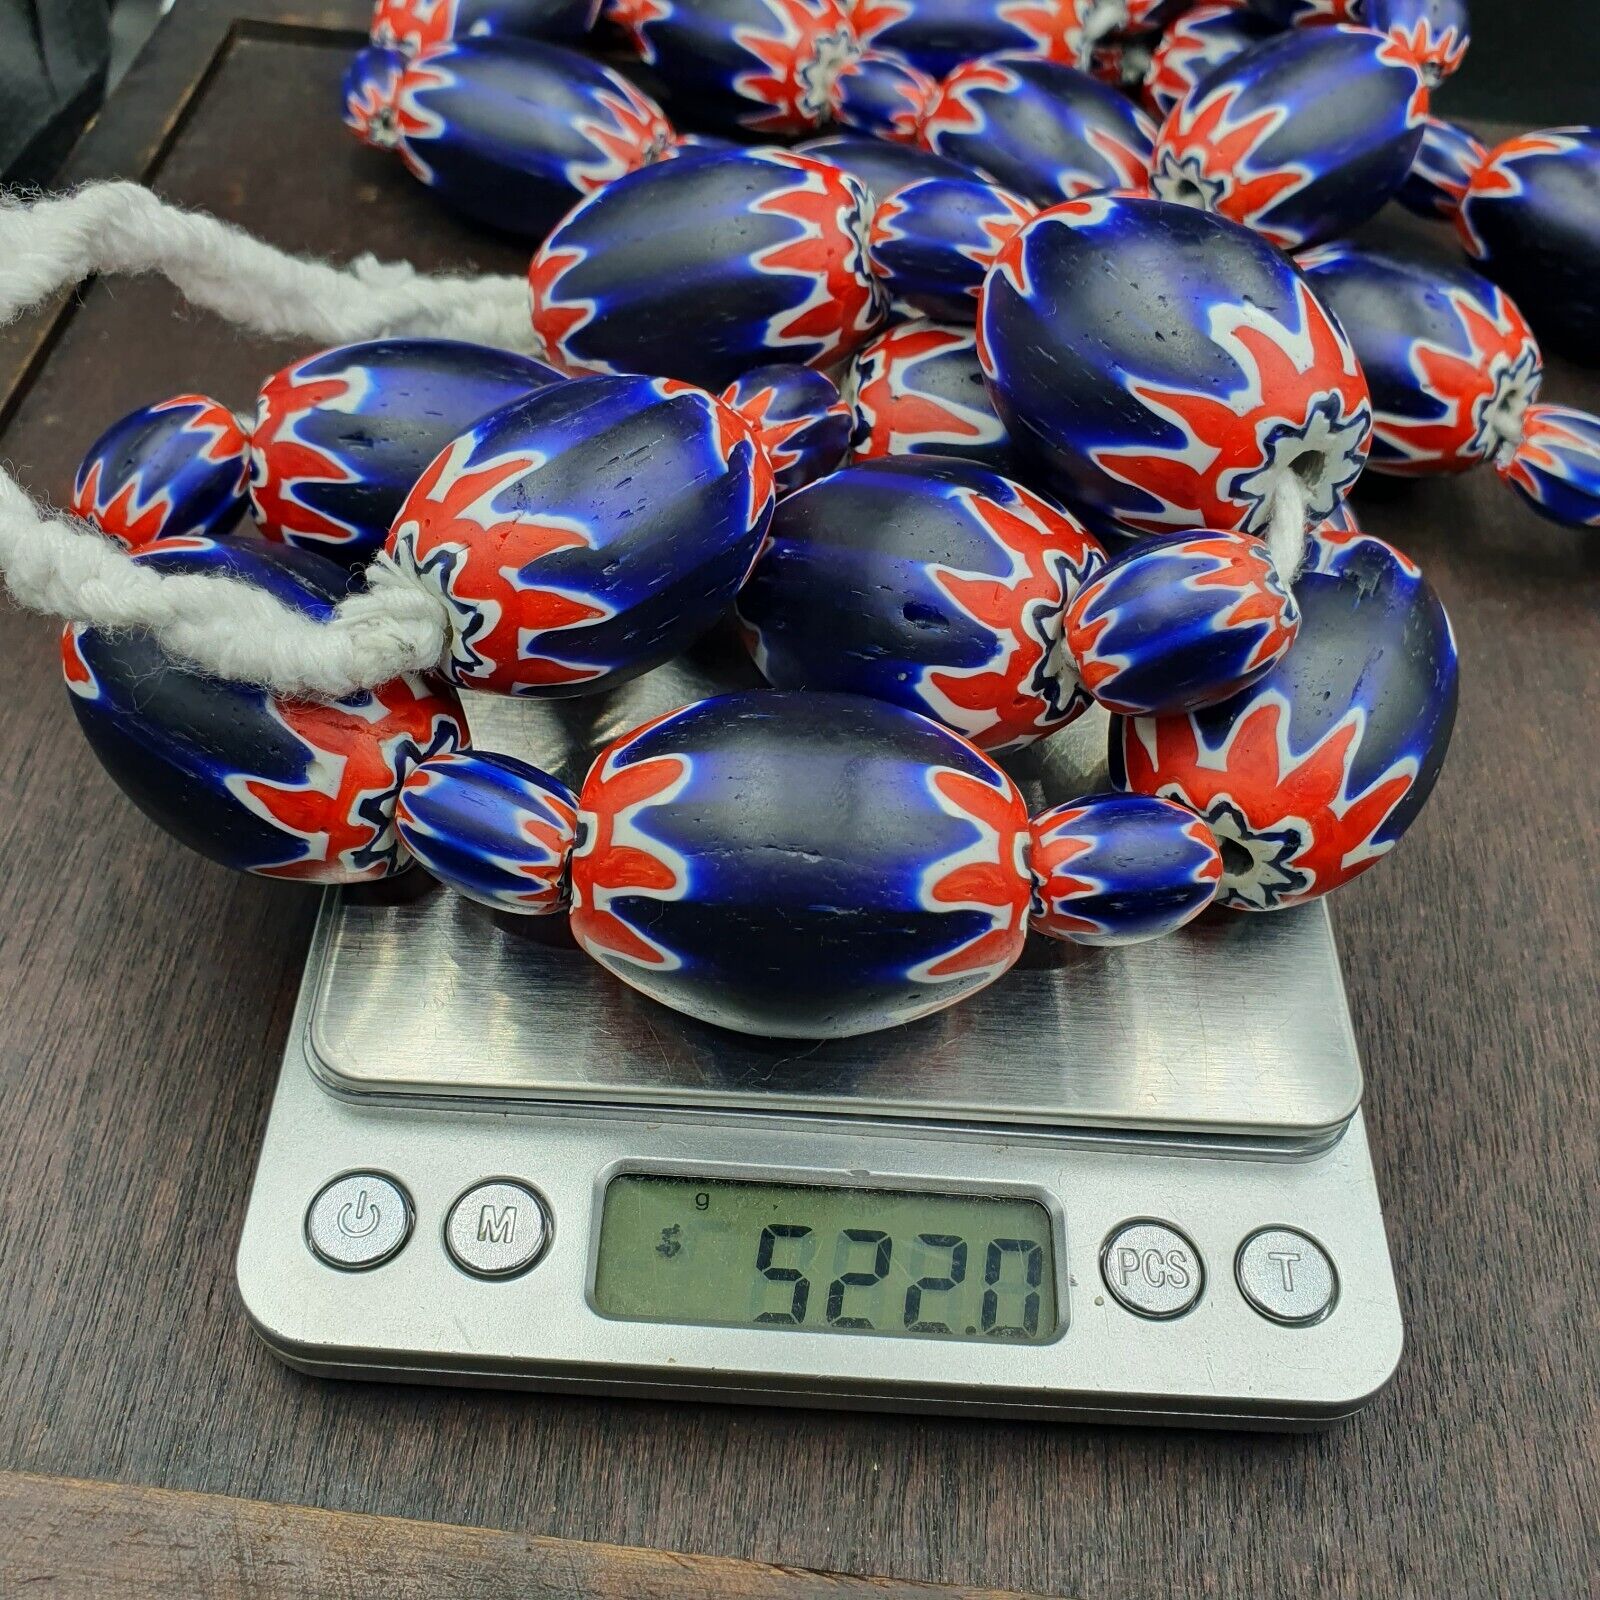 500g Antique Venetian inspired African Blue Glass Chevron With Big Beads 30x20mm